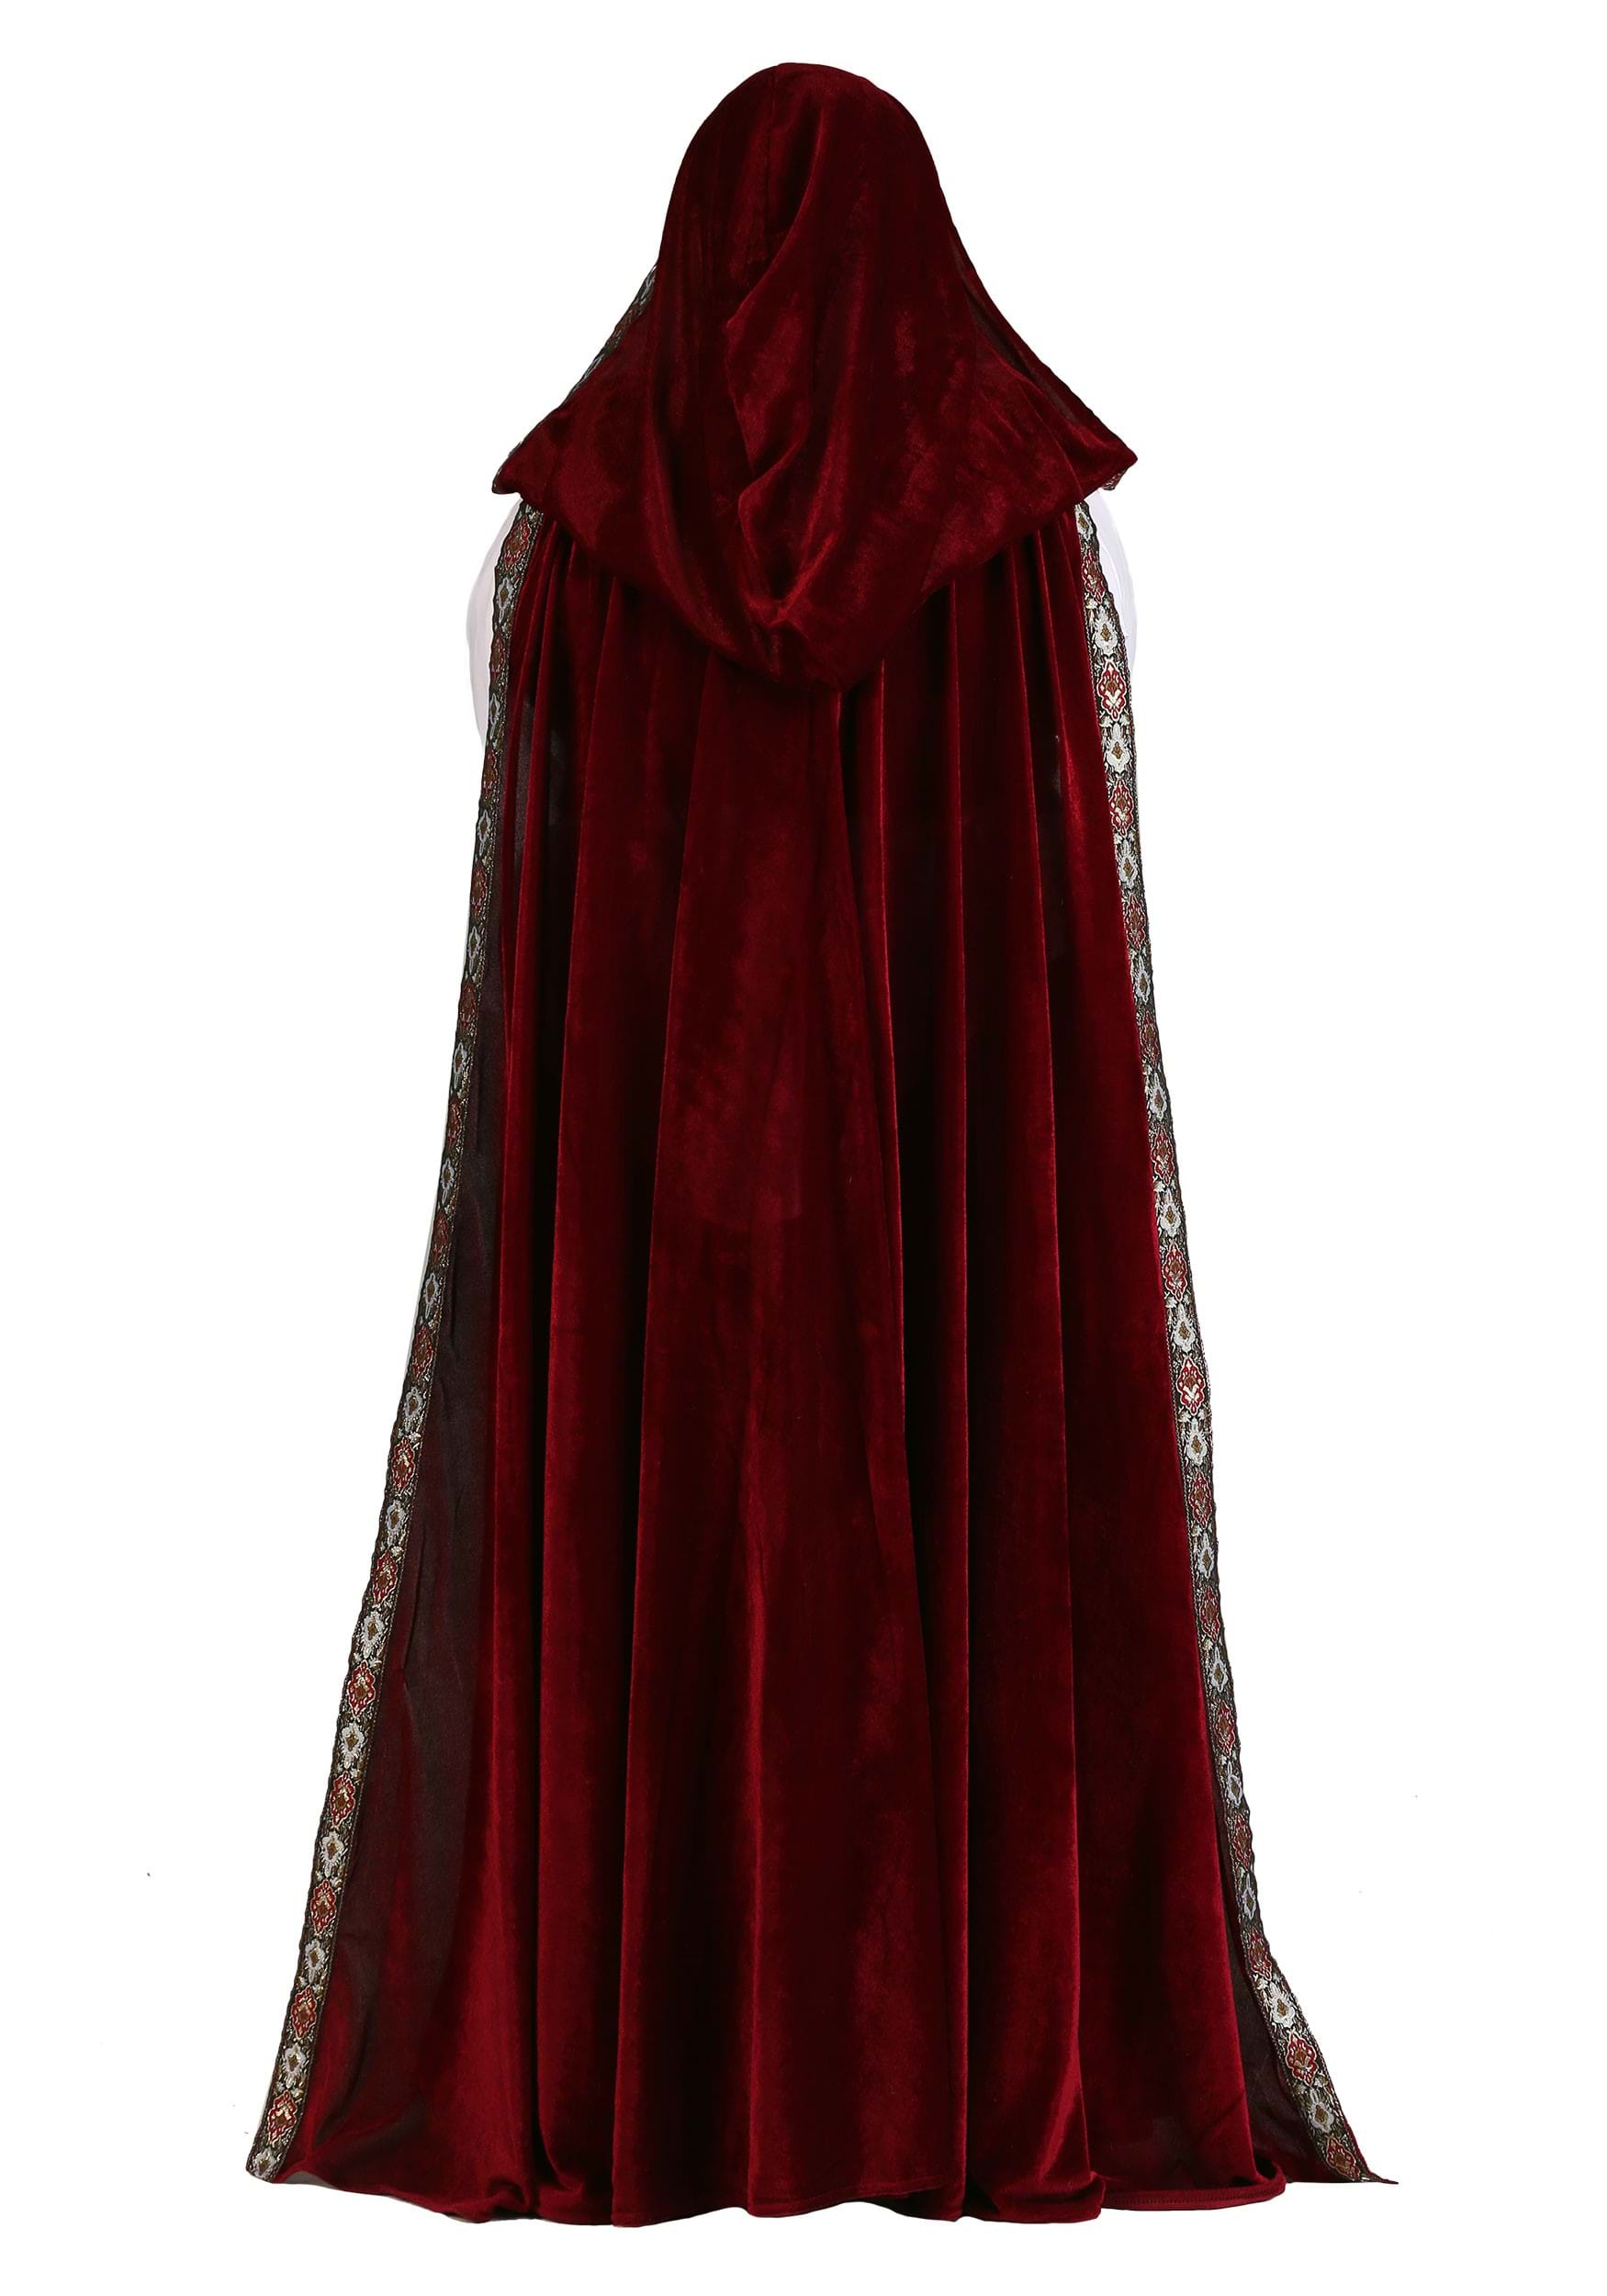 Deluxe Red Riding Hood Plus Size Women's Costume | Exclusive